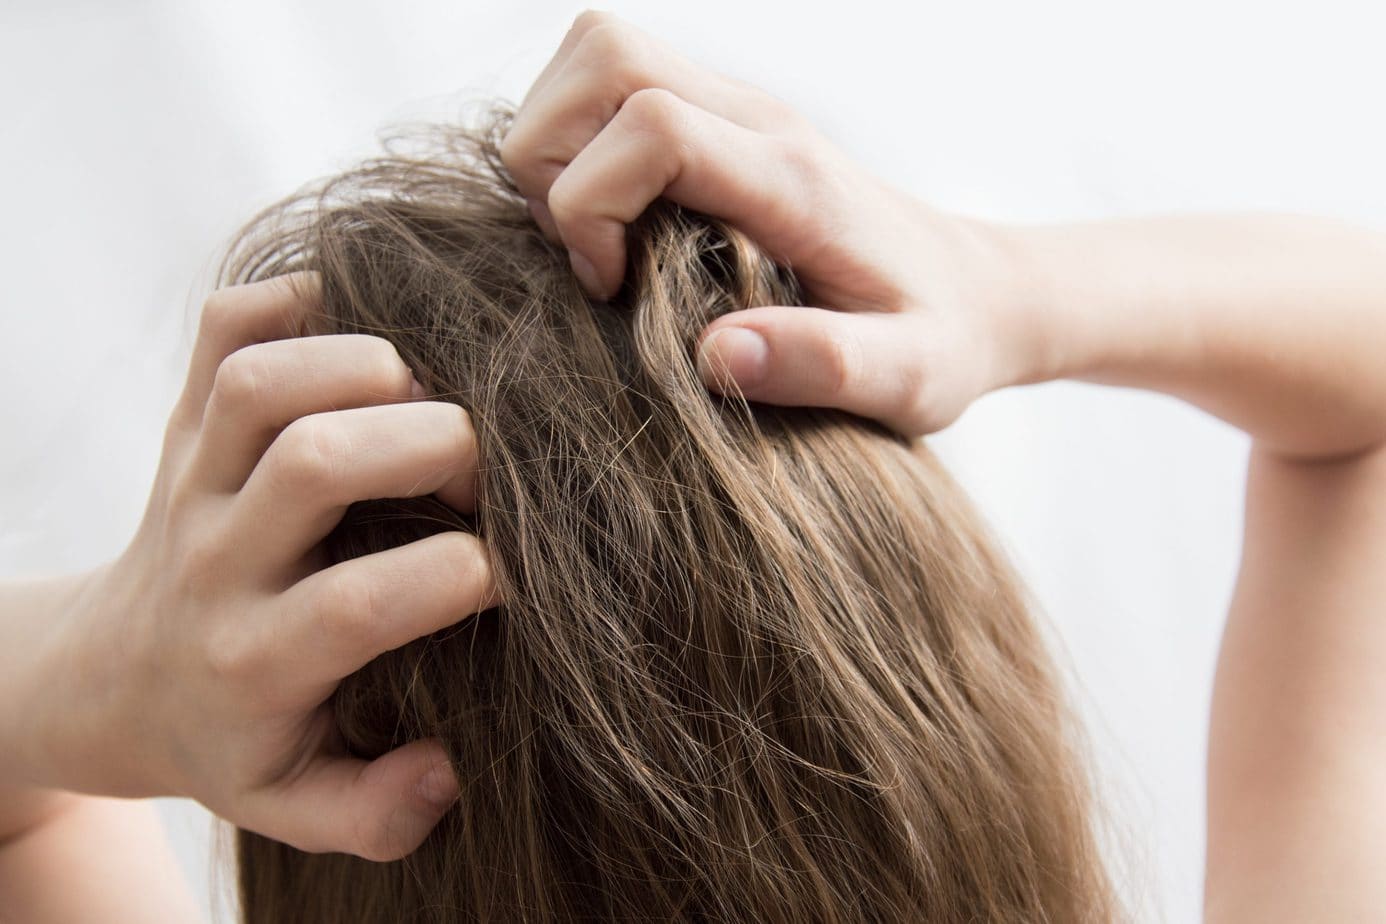 An itchy scalp – what could cause it and how do I combat the problem?